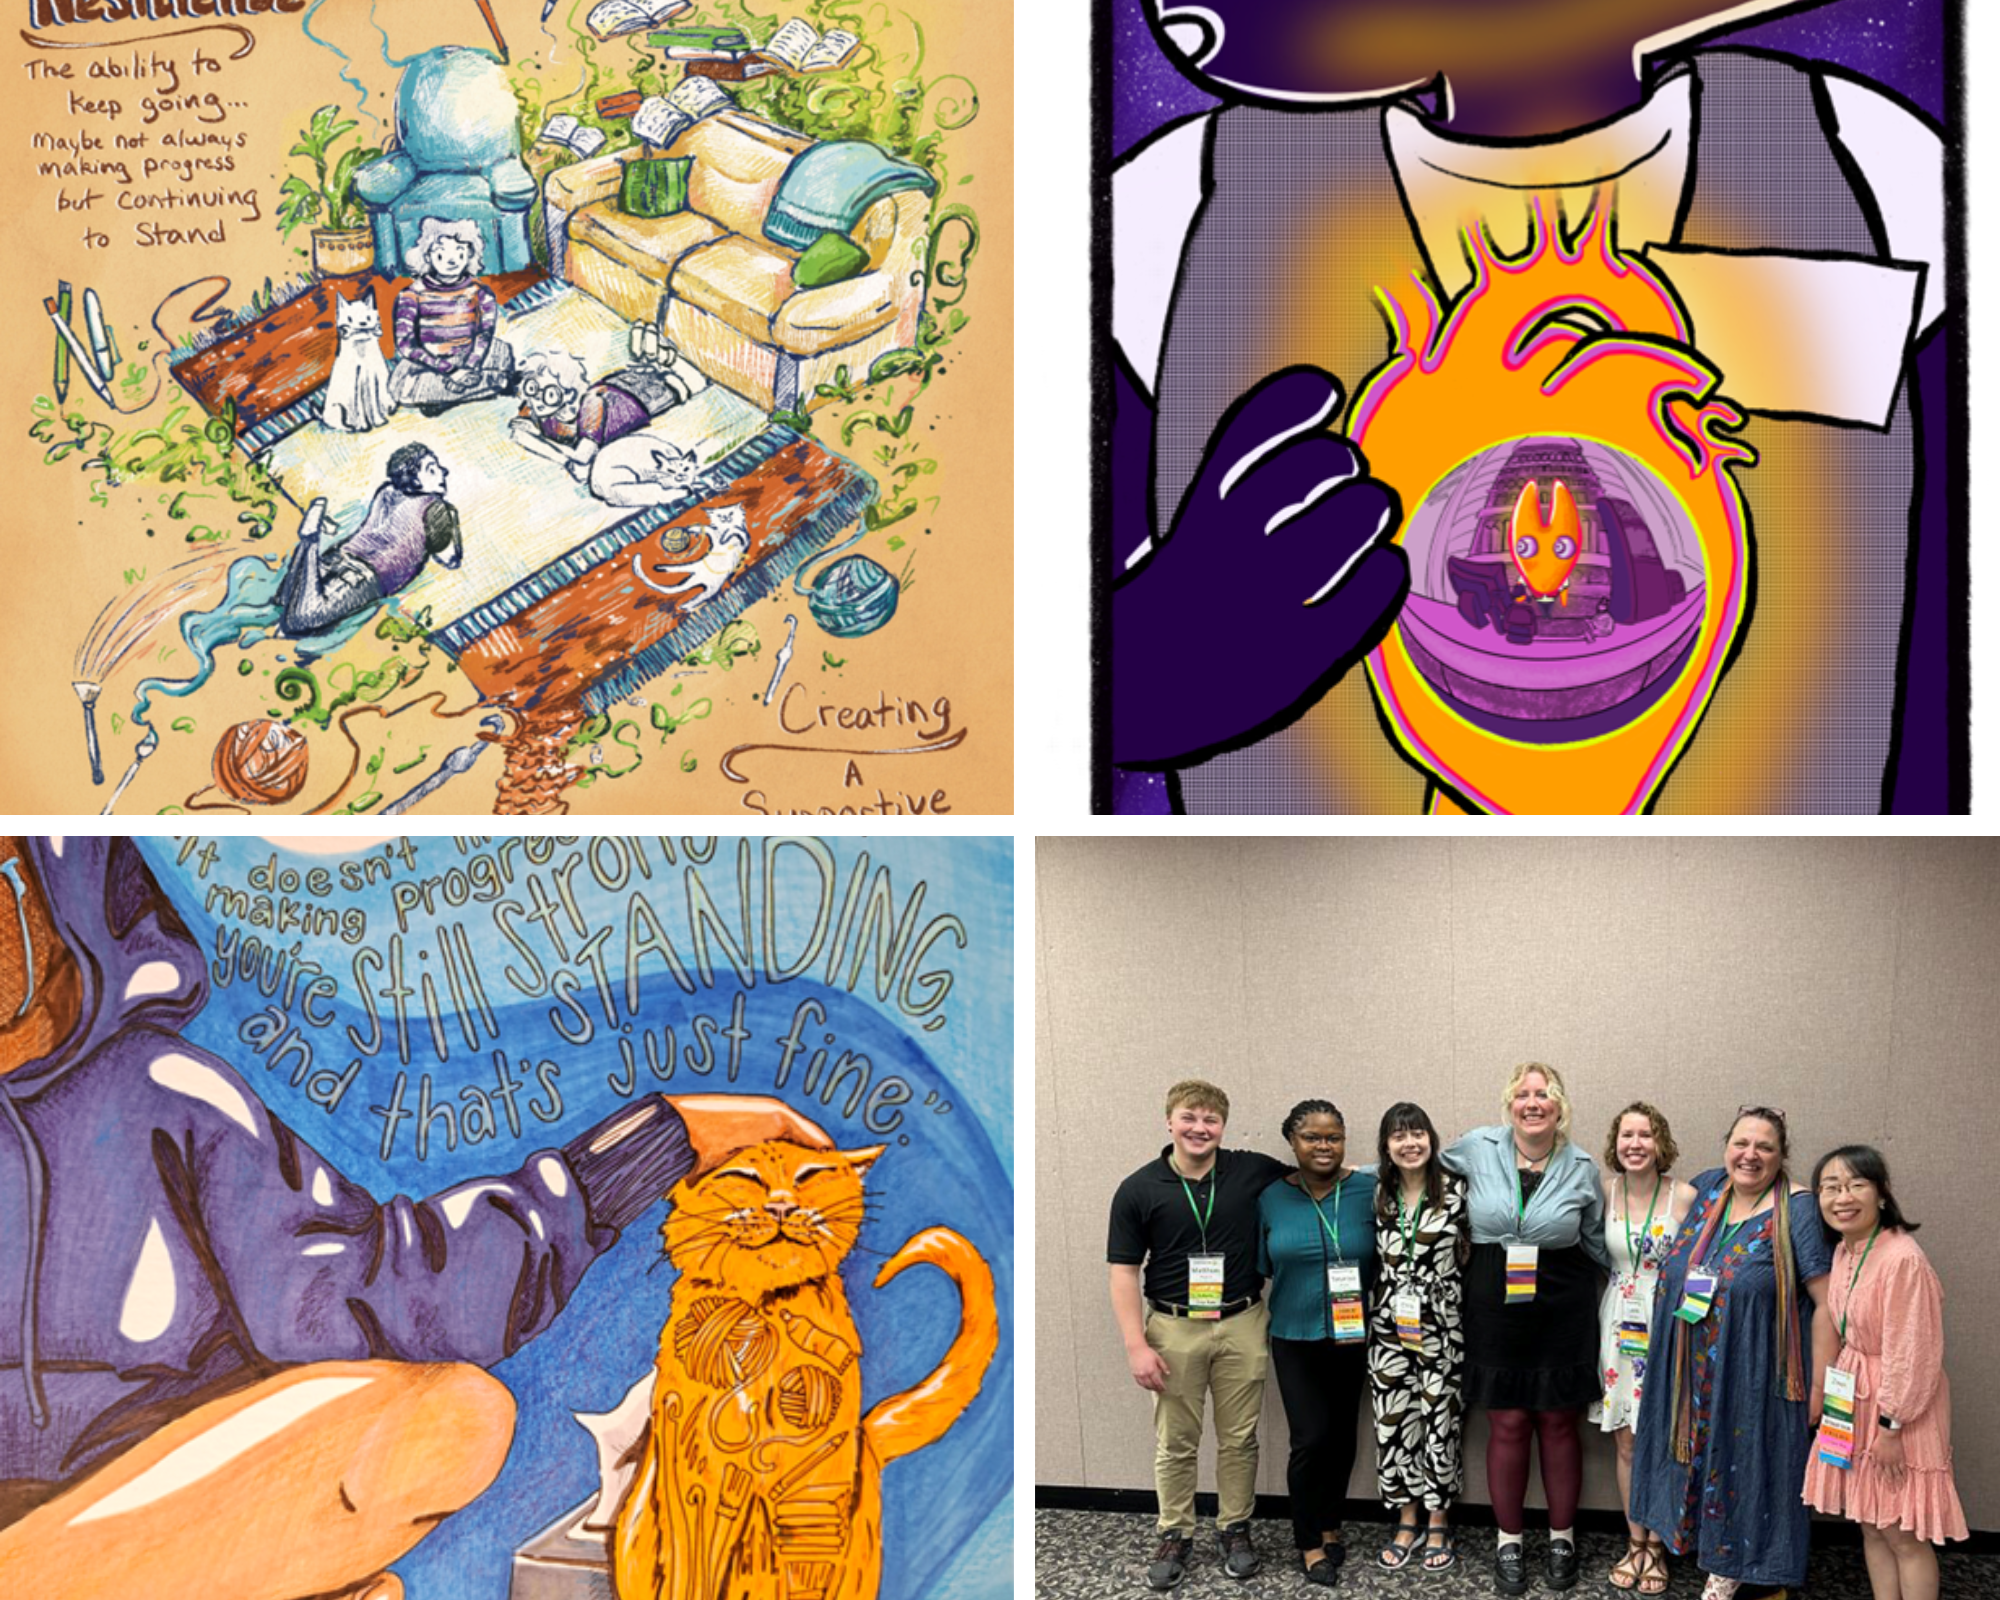 Illustrations by Lexis Beesley, upper left; Jenny Cox, upper right; Emily Schoeppner, lower left. Team members are shown, lower right.